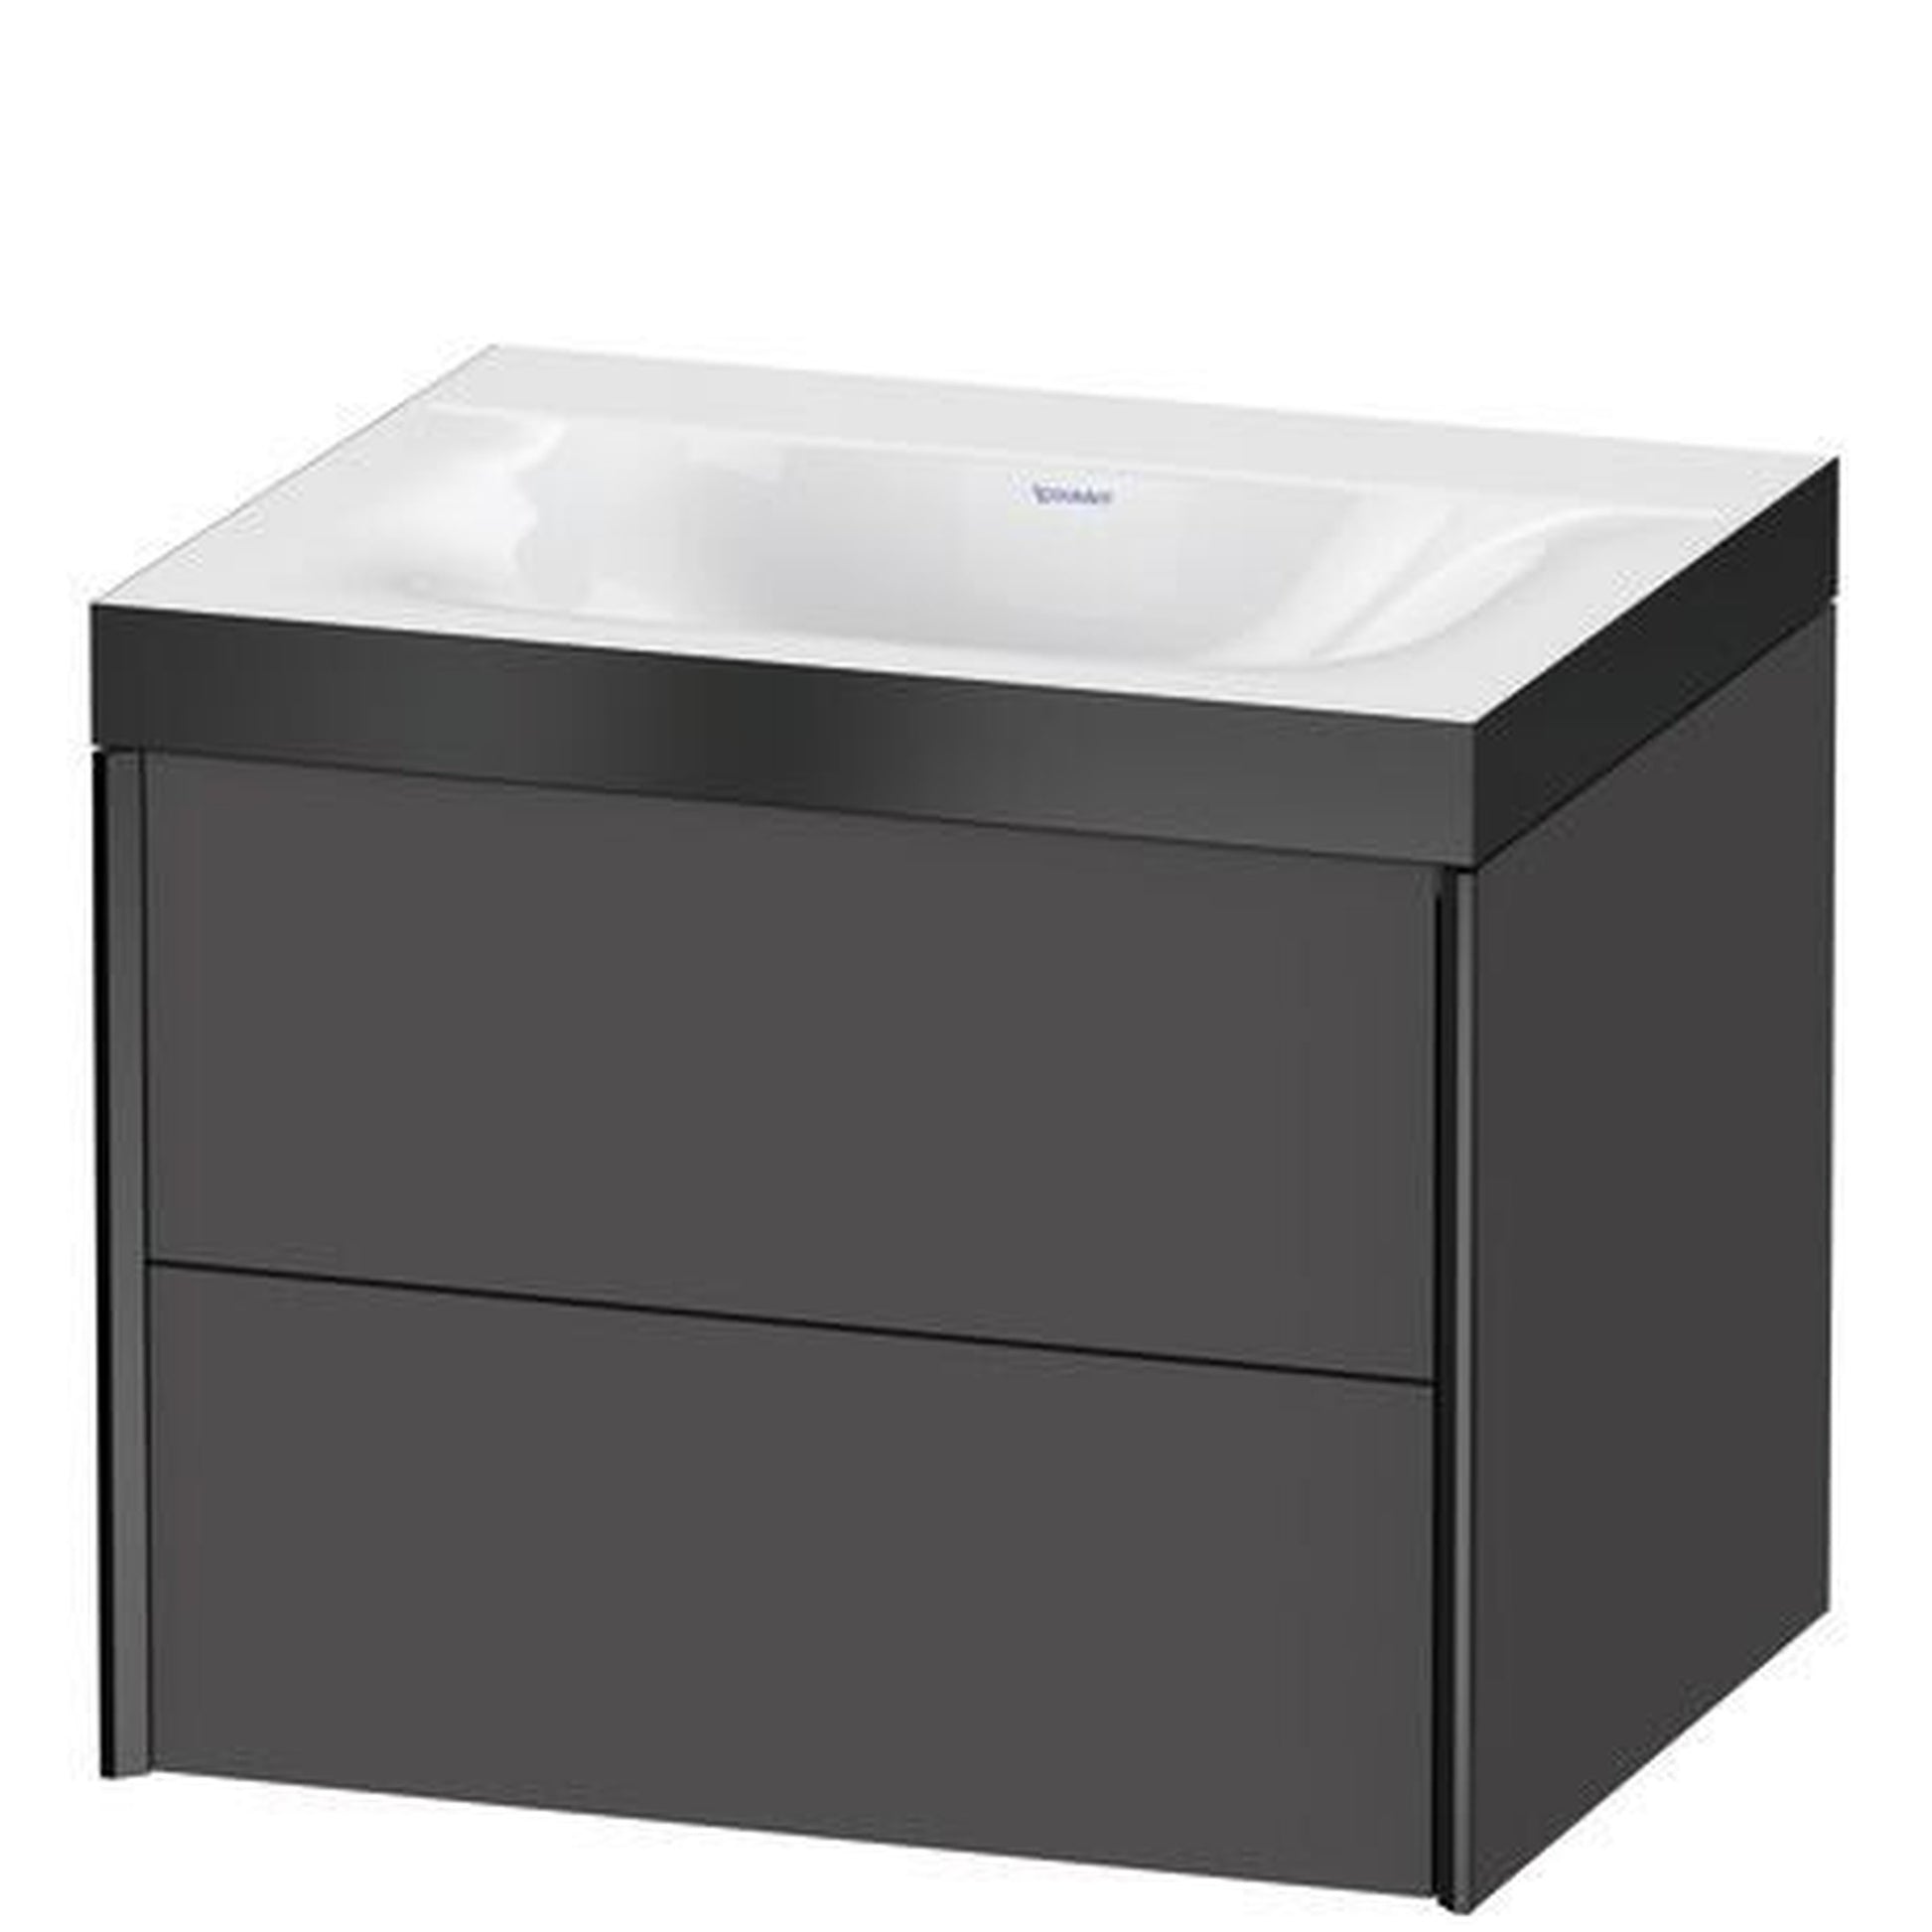 Duravit Xviu 24" x 20" x 19" Two Drawer C-Bonded Wall-Mount Vanity Kit Without Tap Hole, Graphite (XV4614NB249P)